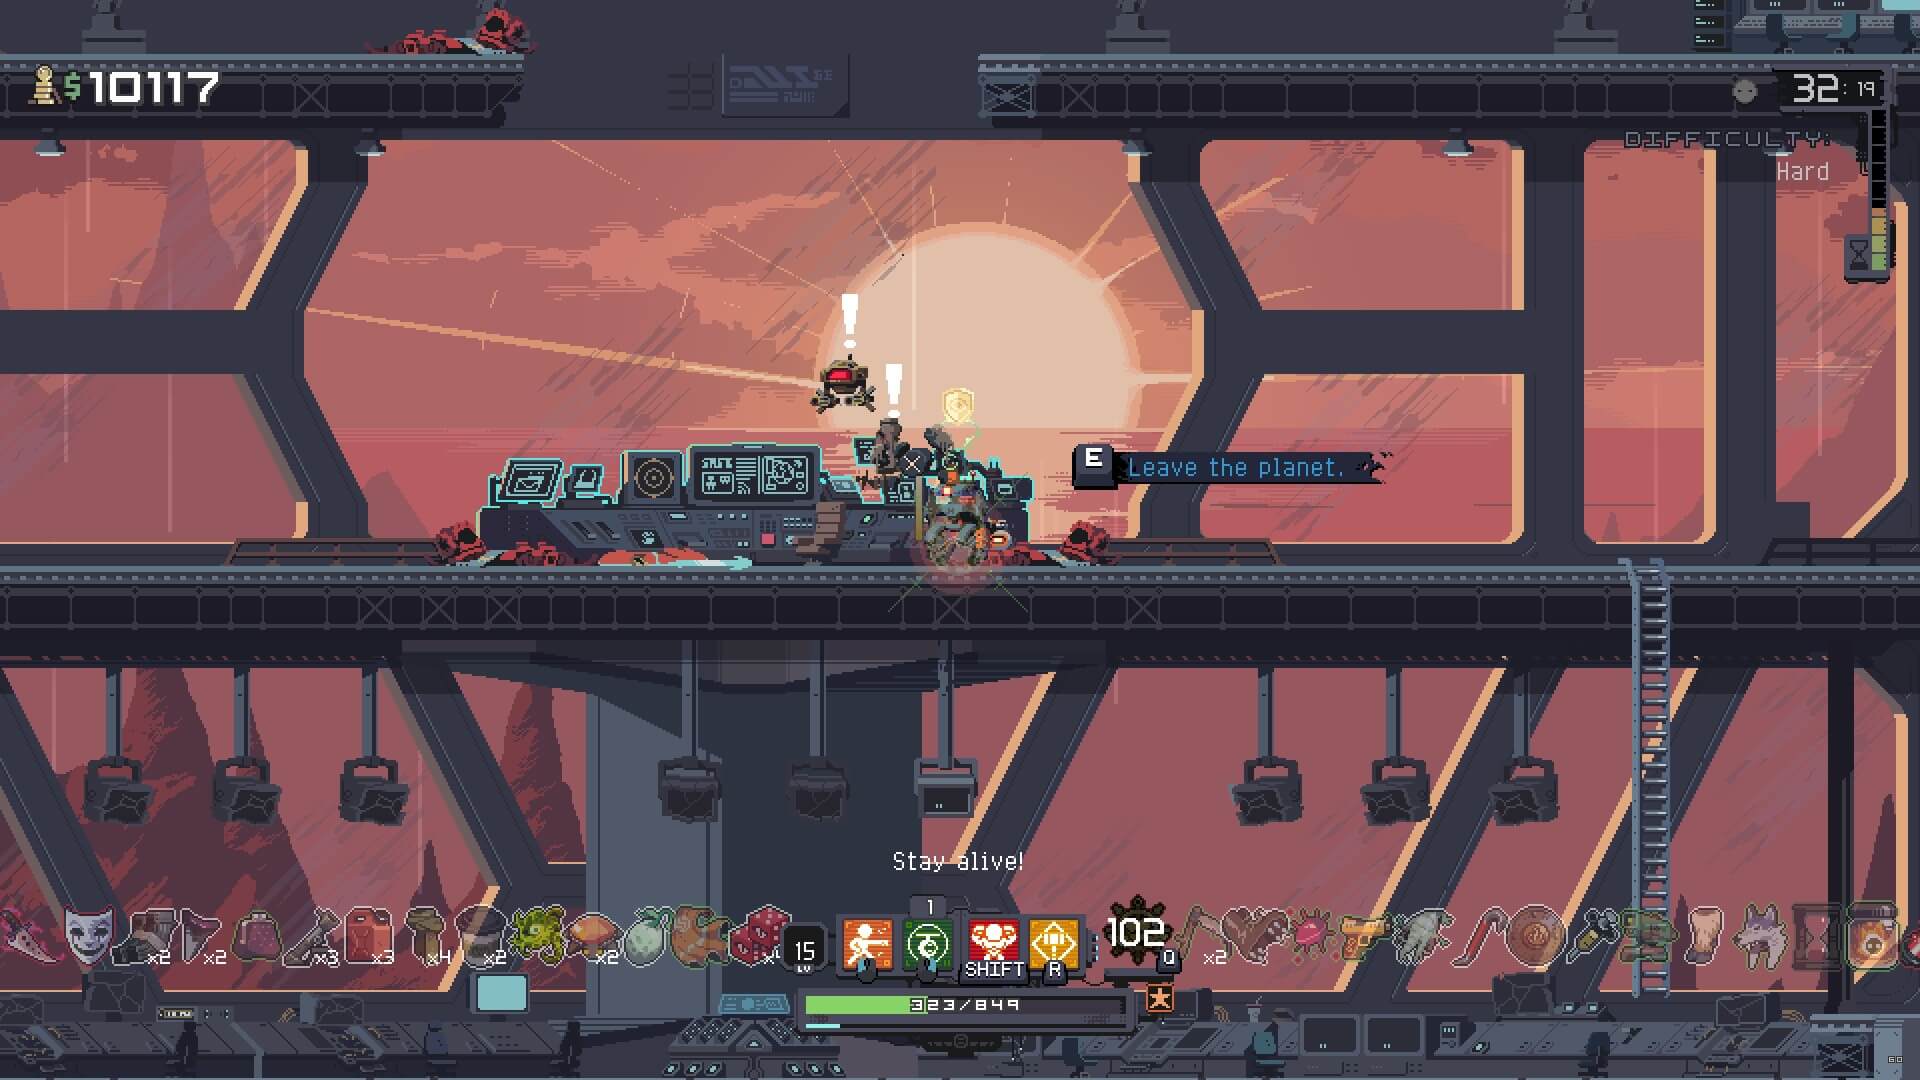 A huge room with broken monitors and a view literally to die for. Survivor with several amount of items that can barely fit in the screen. The sun rising over the horizon while four corpses lie there montionless.